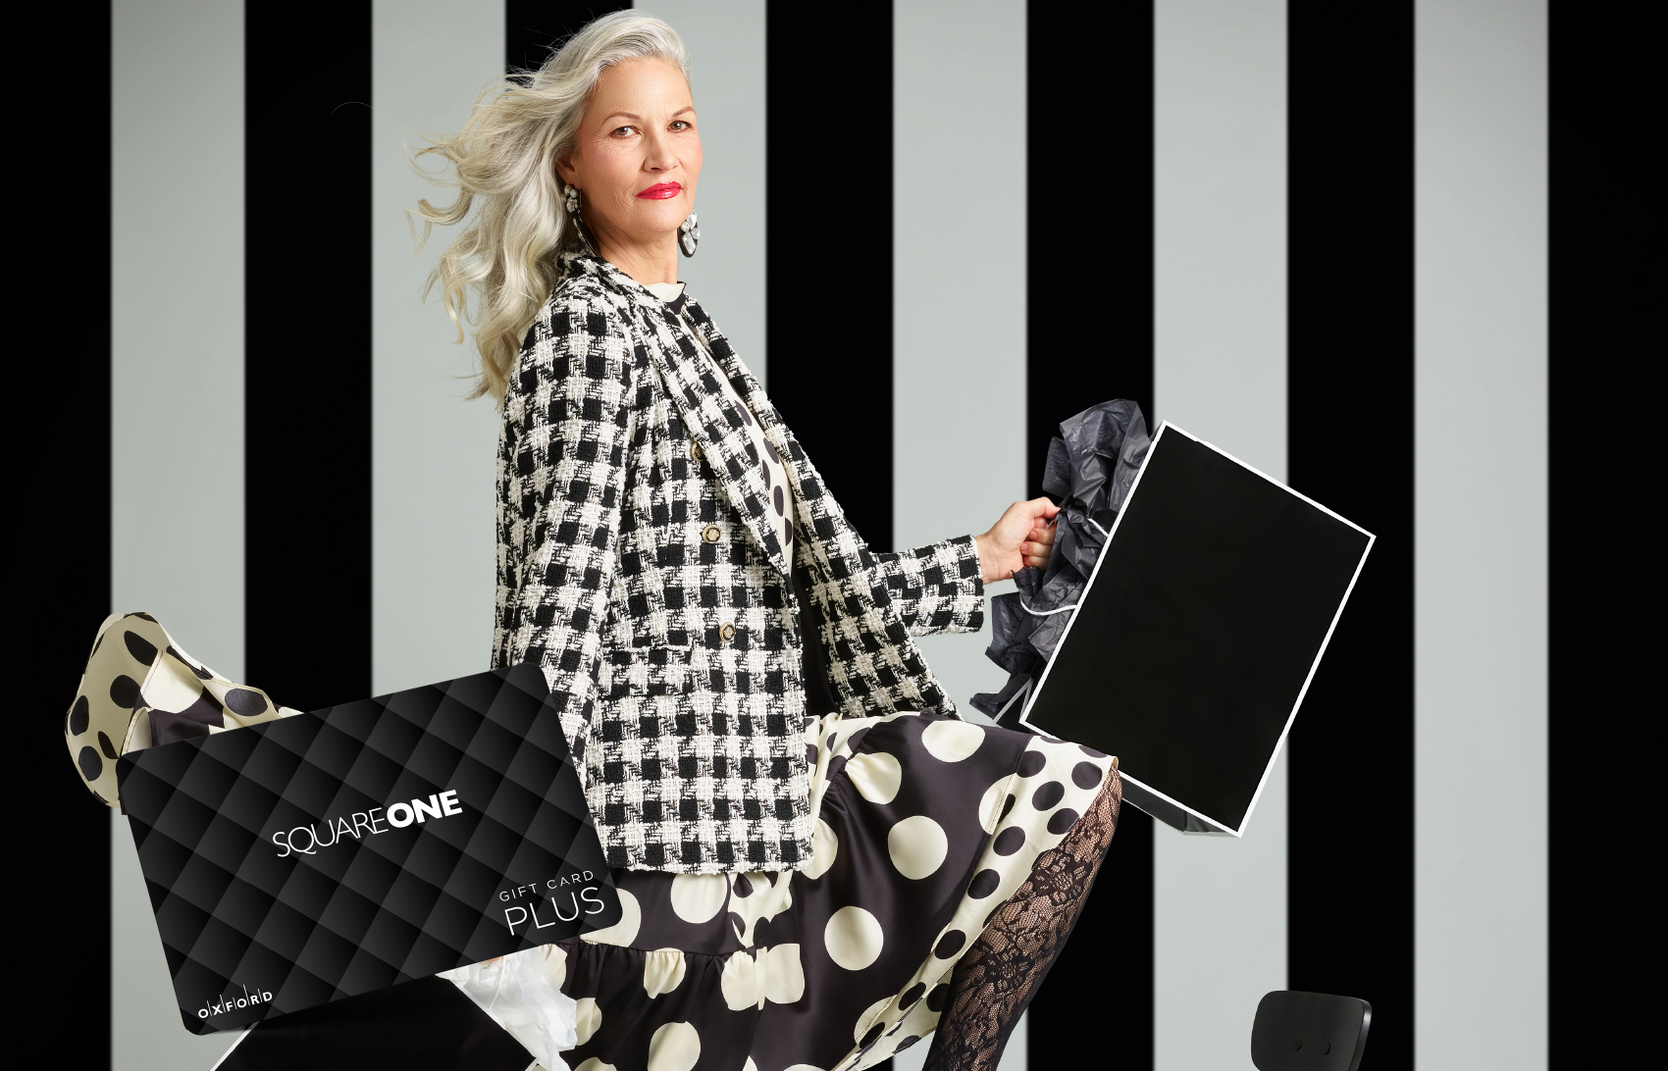 promotional image for a Square One gift card. It shows a woman wearing a black and white houndstooth blazer and black and white polka dot skirt holding black and white shopping bags. A Square One gift card is also in the image